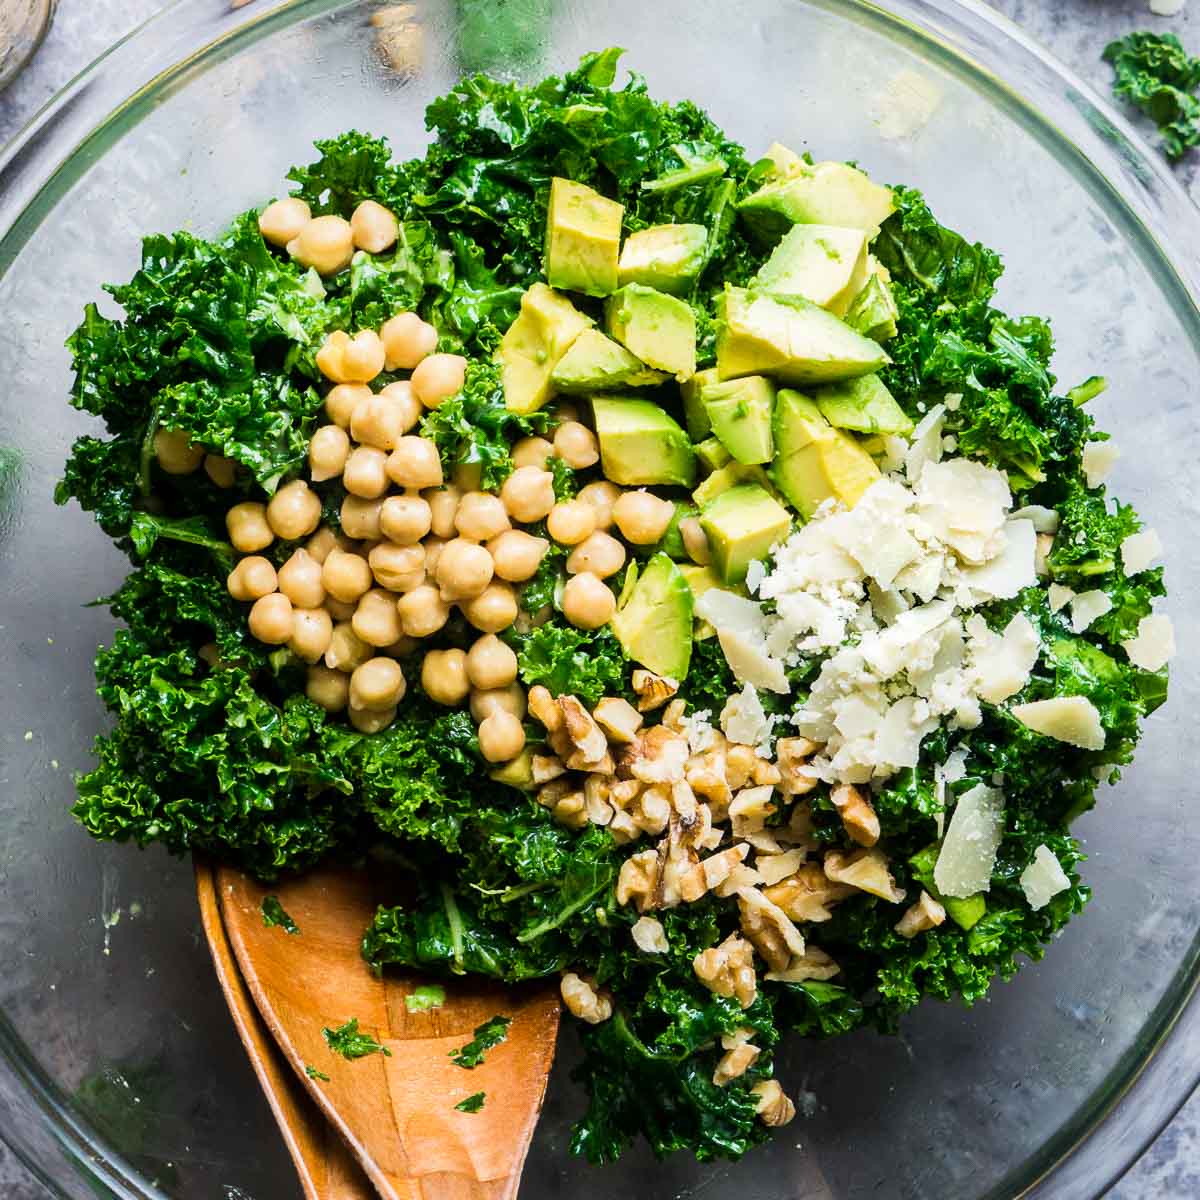 kale salad with toppings in glass bowl with salad tongs